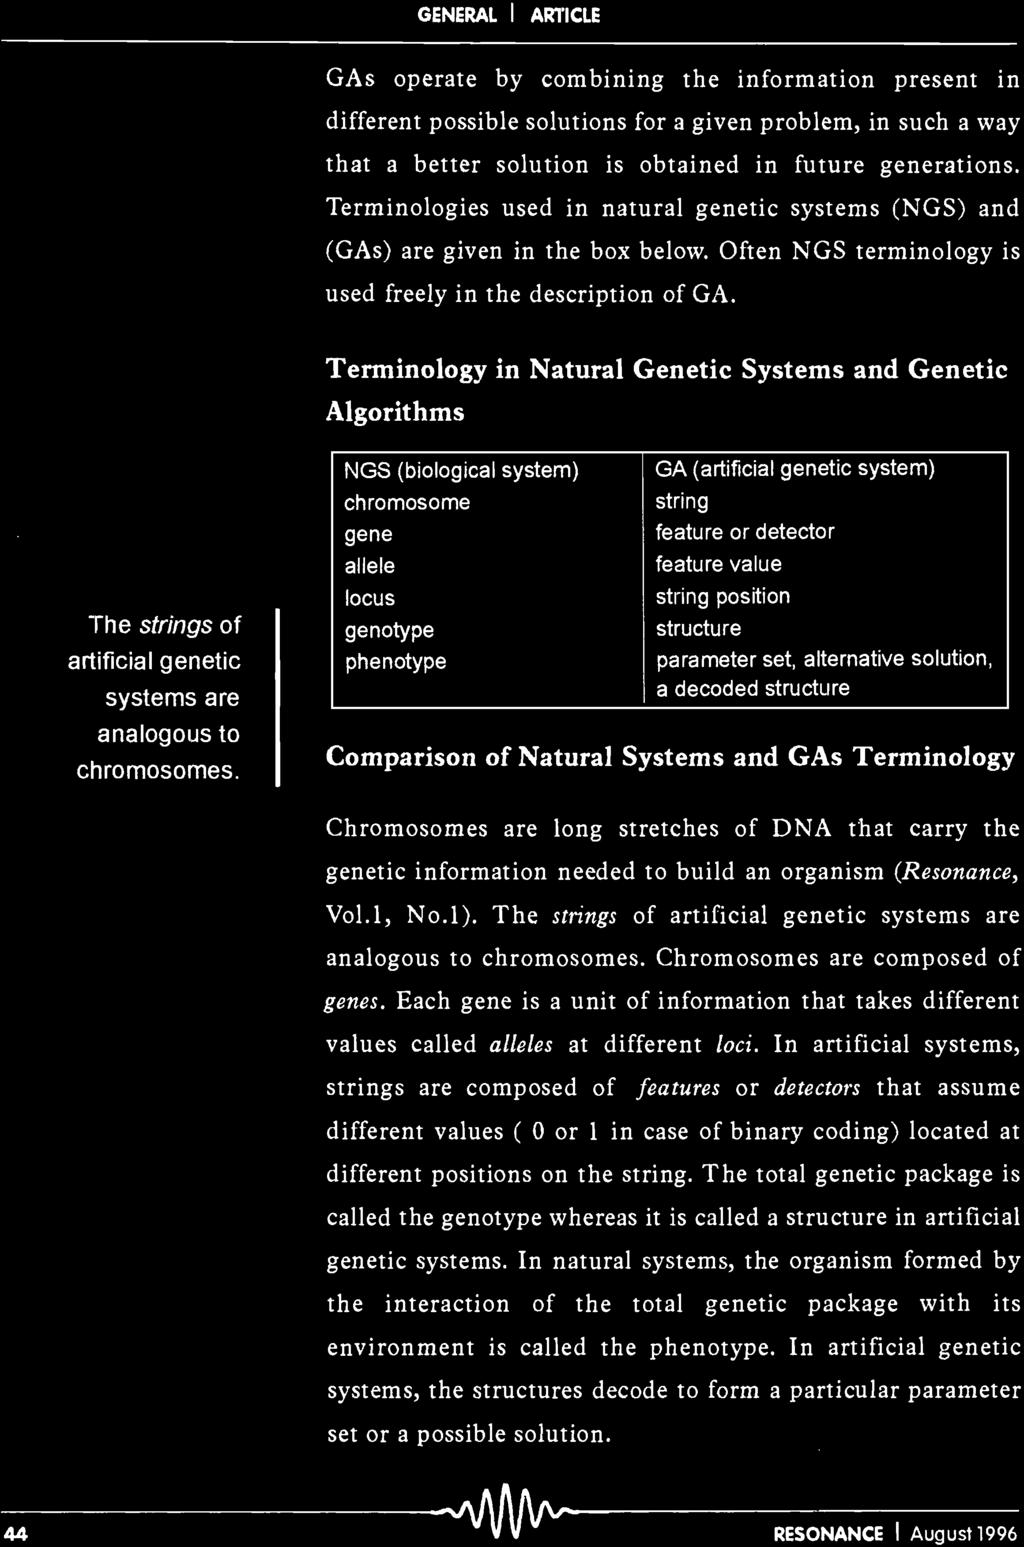 Terminology in Natural Genetic Systems and Genetic Algorithms The strings of artificial genetic systems are analogous to chromosomes.